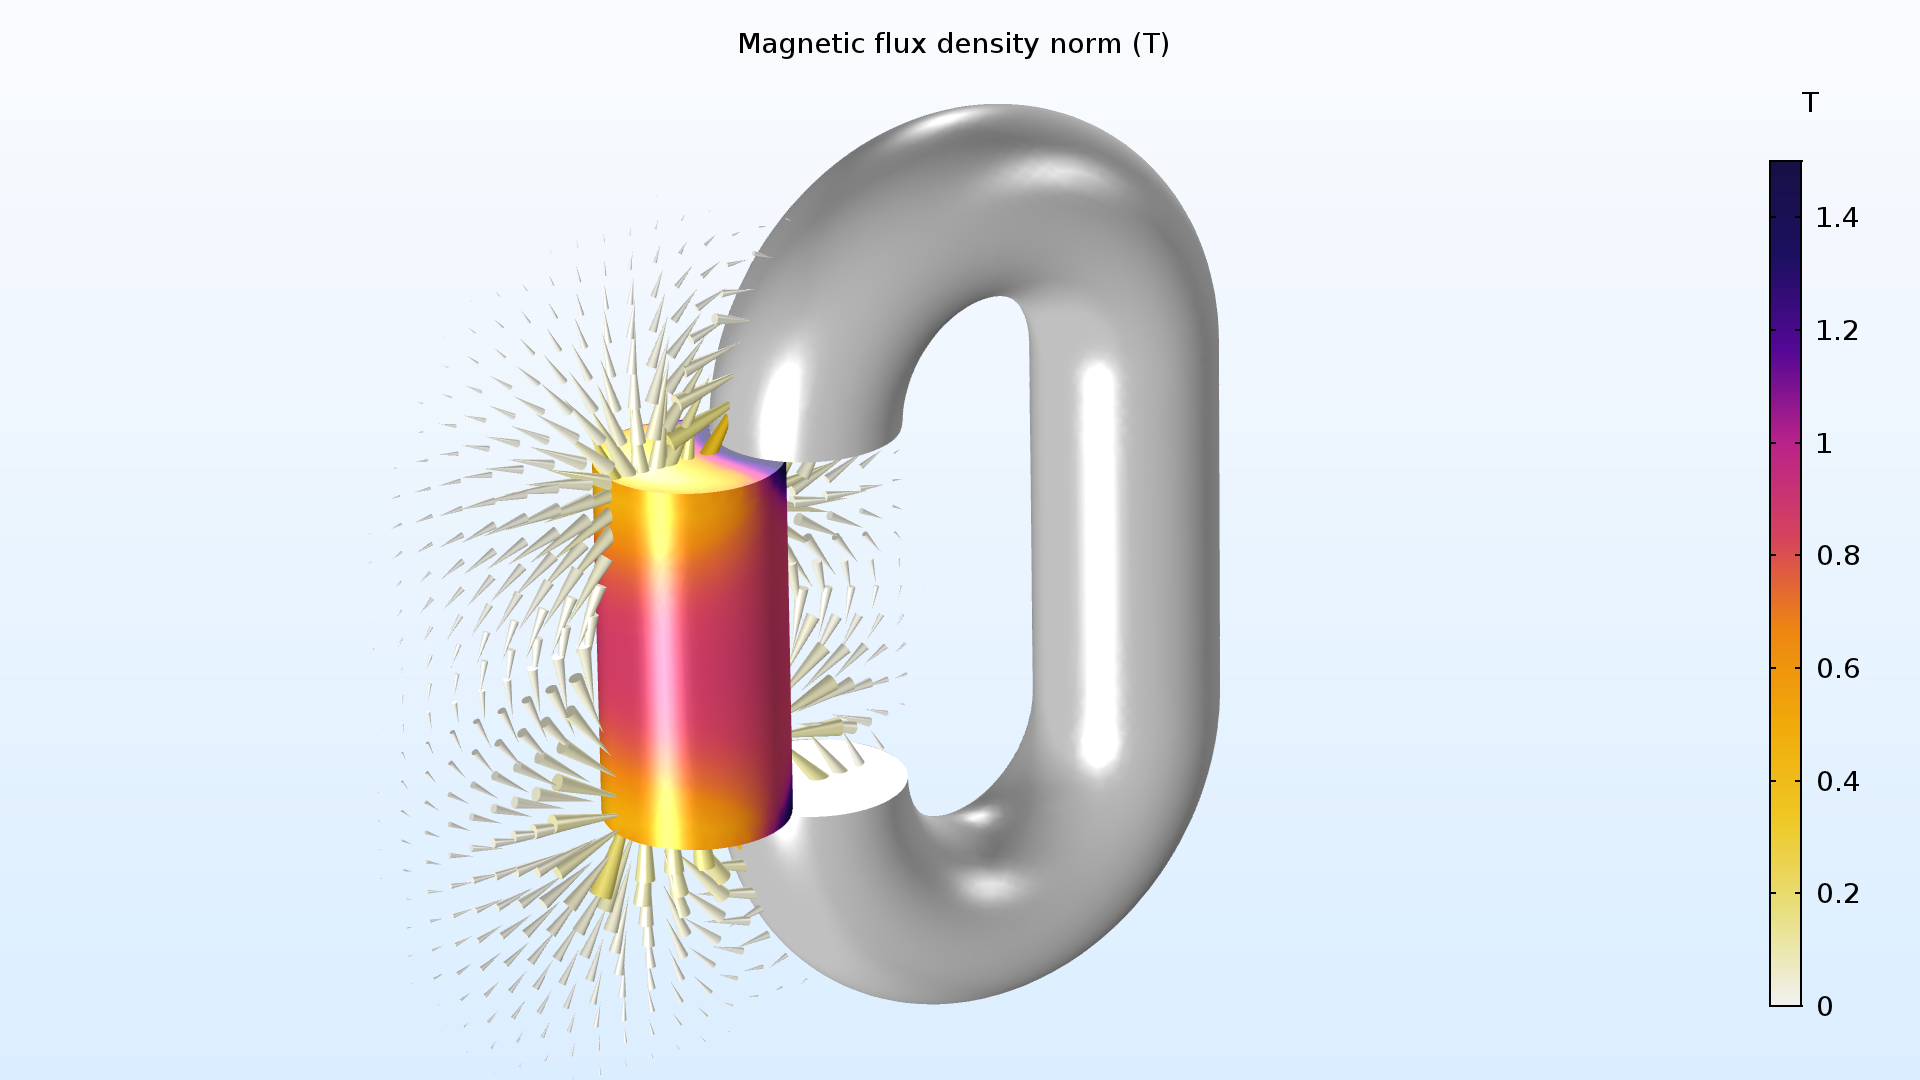 Model the demagnetization of permanent magnets in the AC/DC Module.